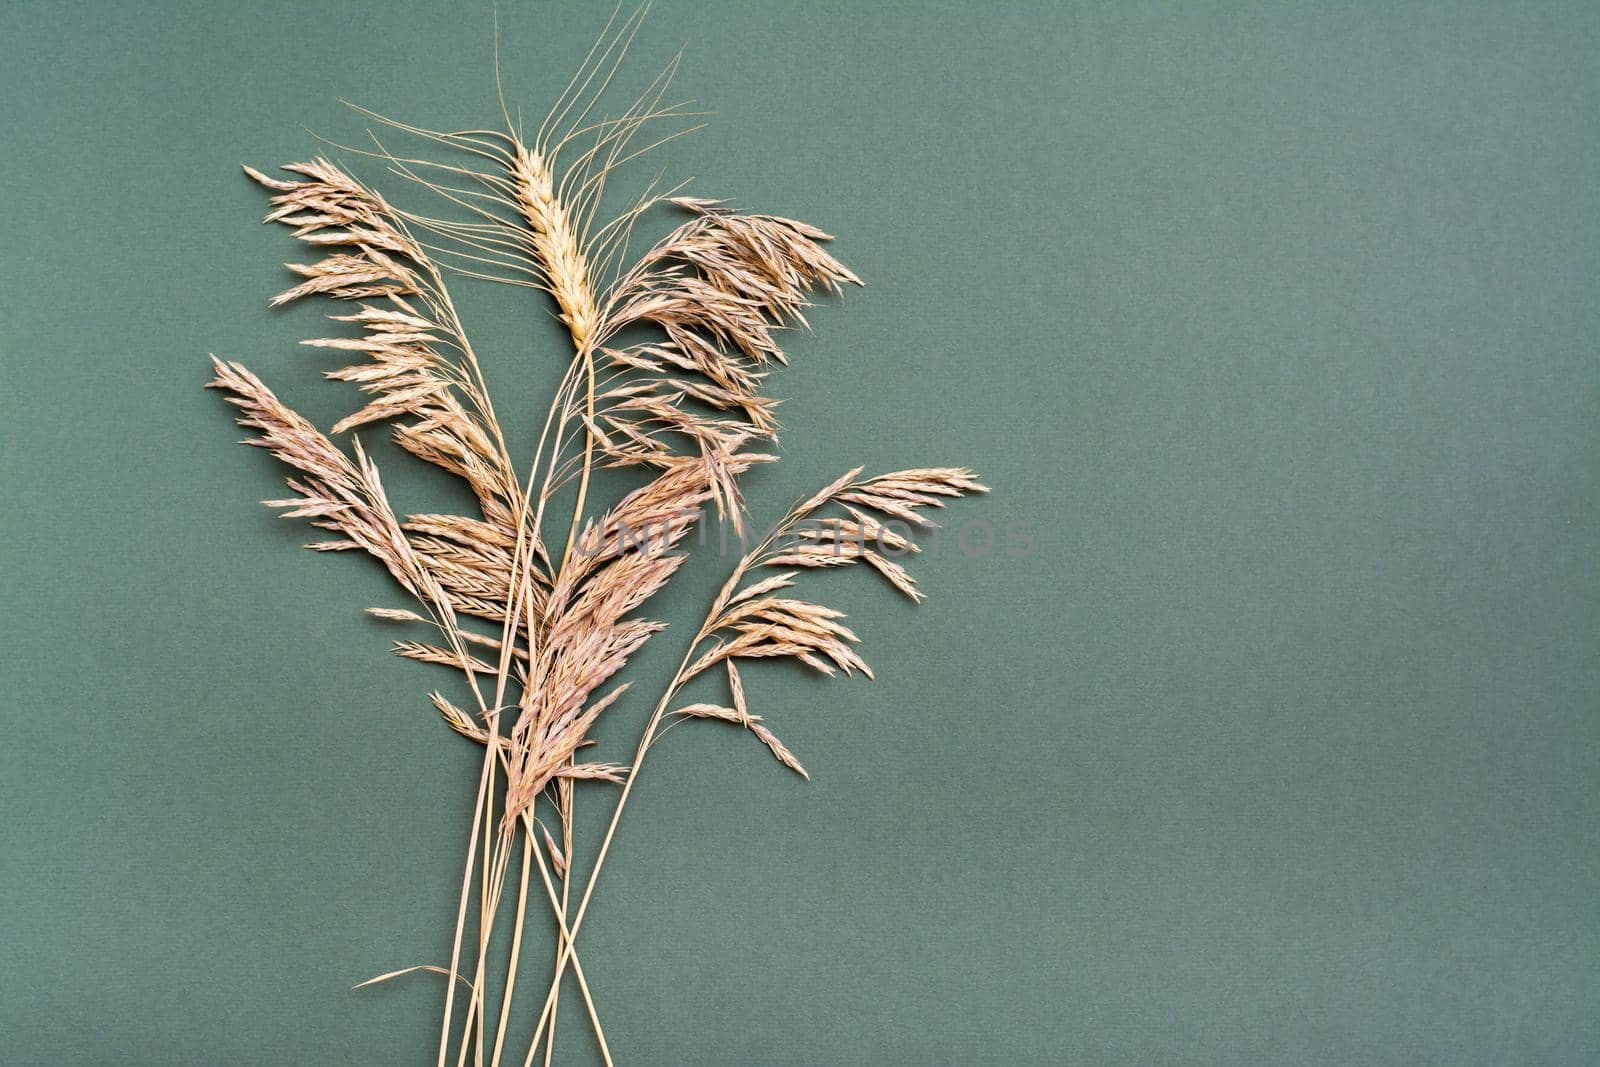 An ear of wheat among dry grass on a green background. Identity concept by Aleruana